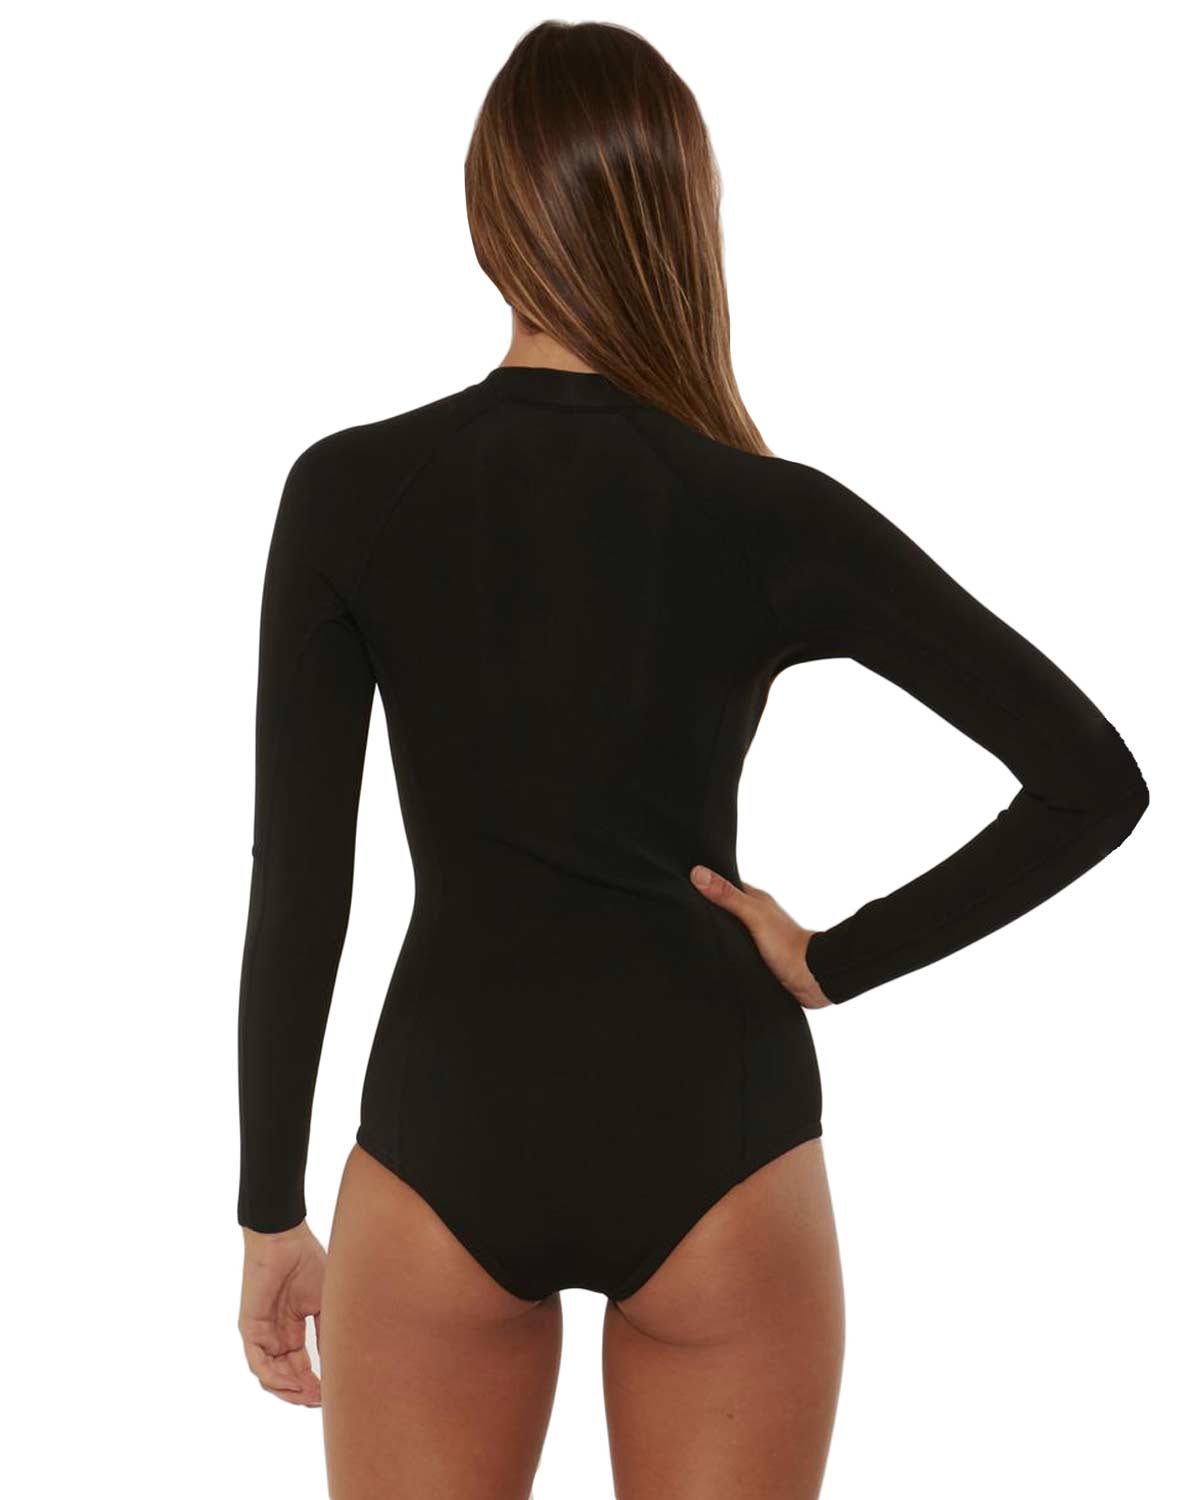 Competition Swim-Dive Jammers in Gloss Black Stretch vinyl/nylon/lycra